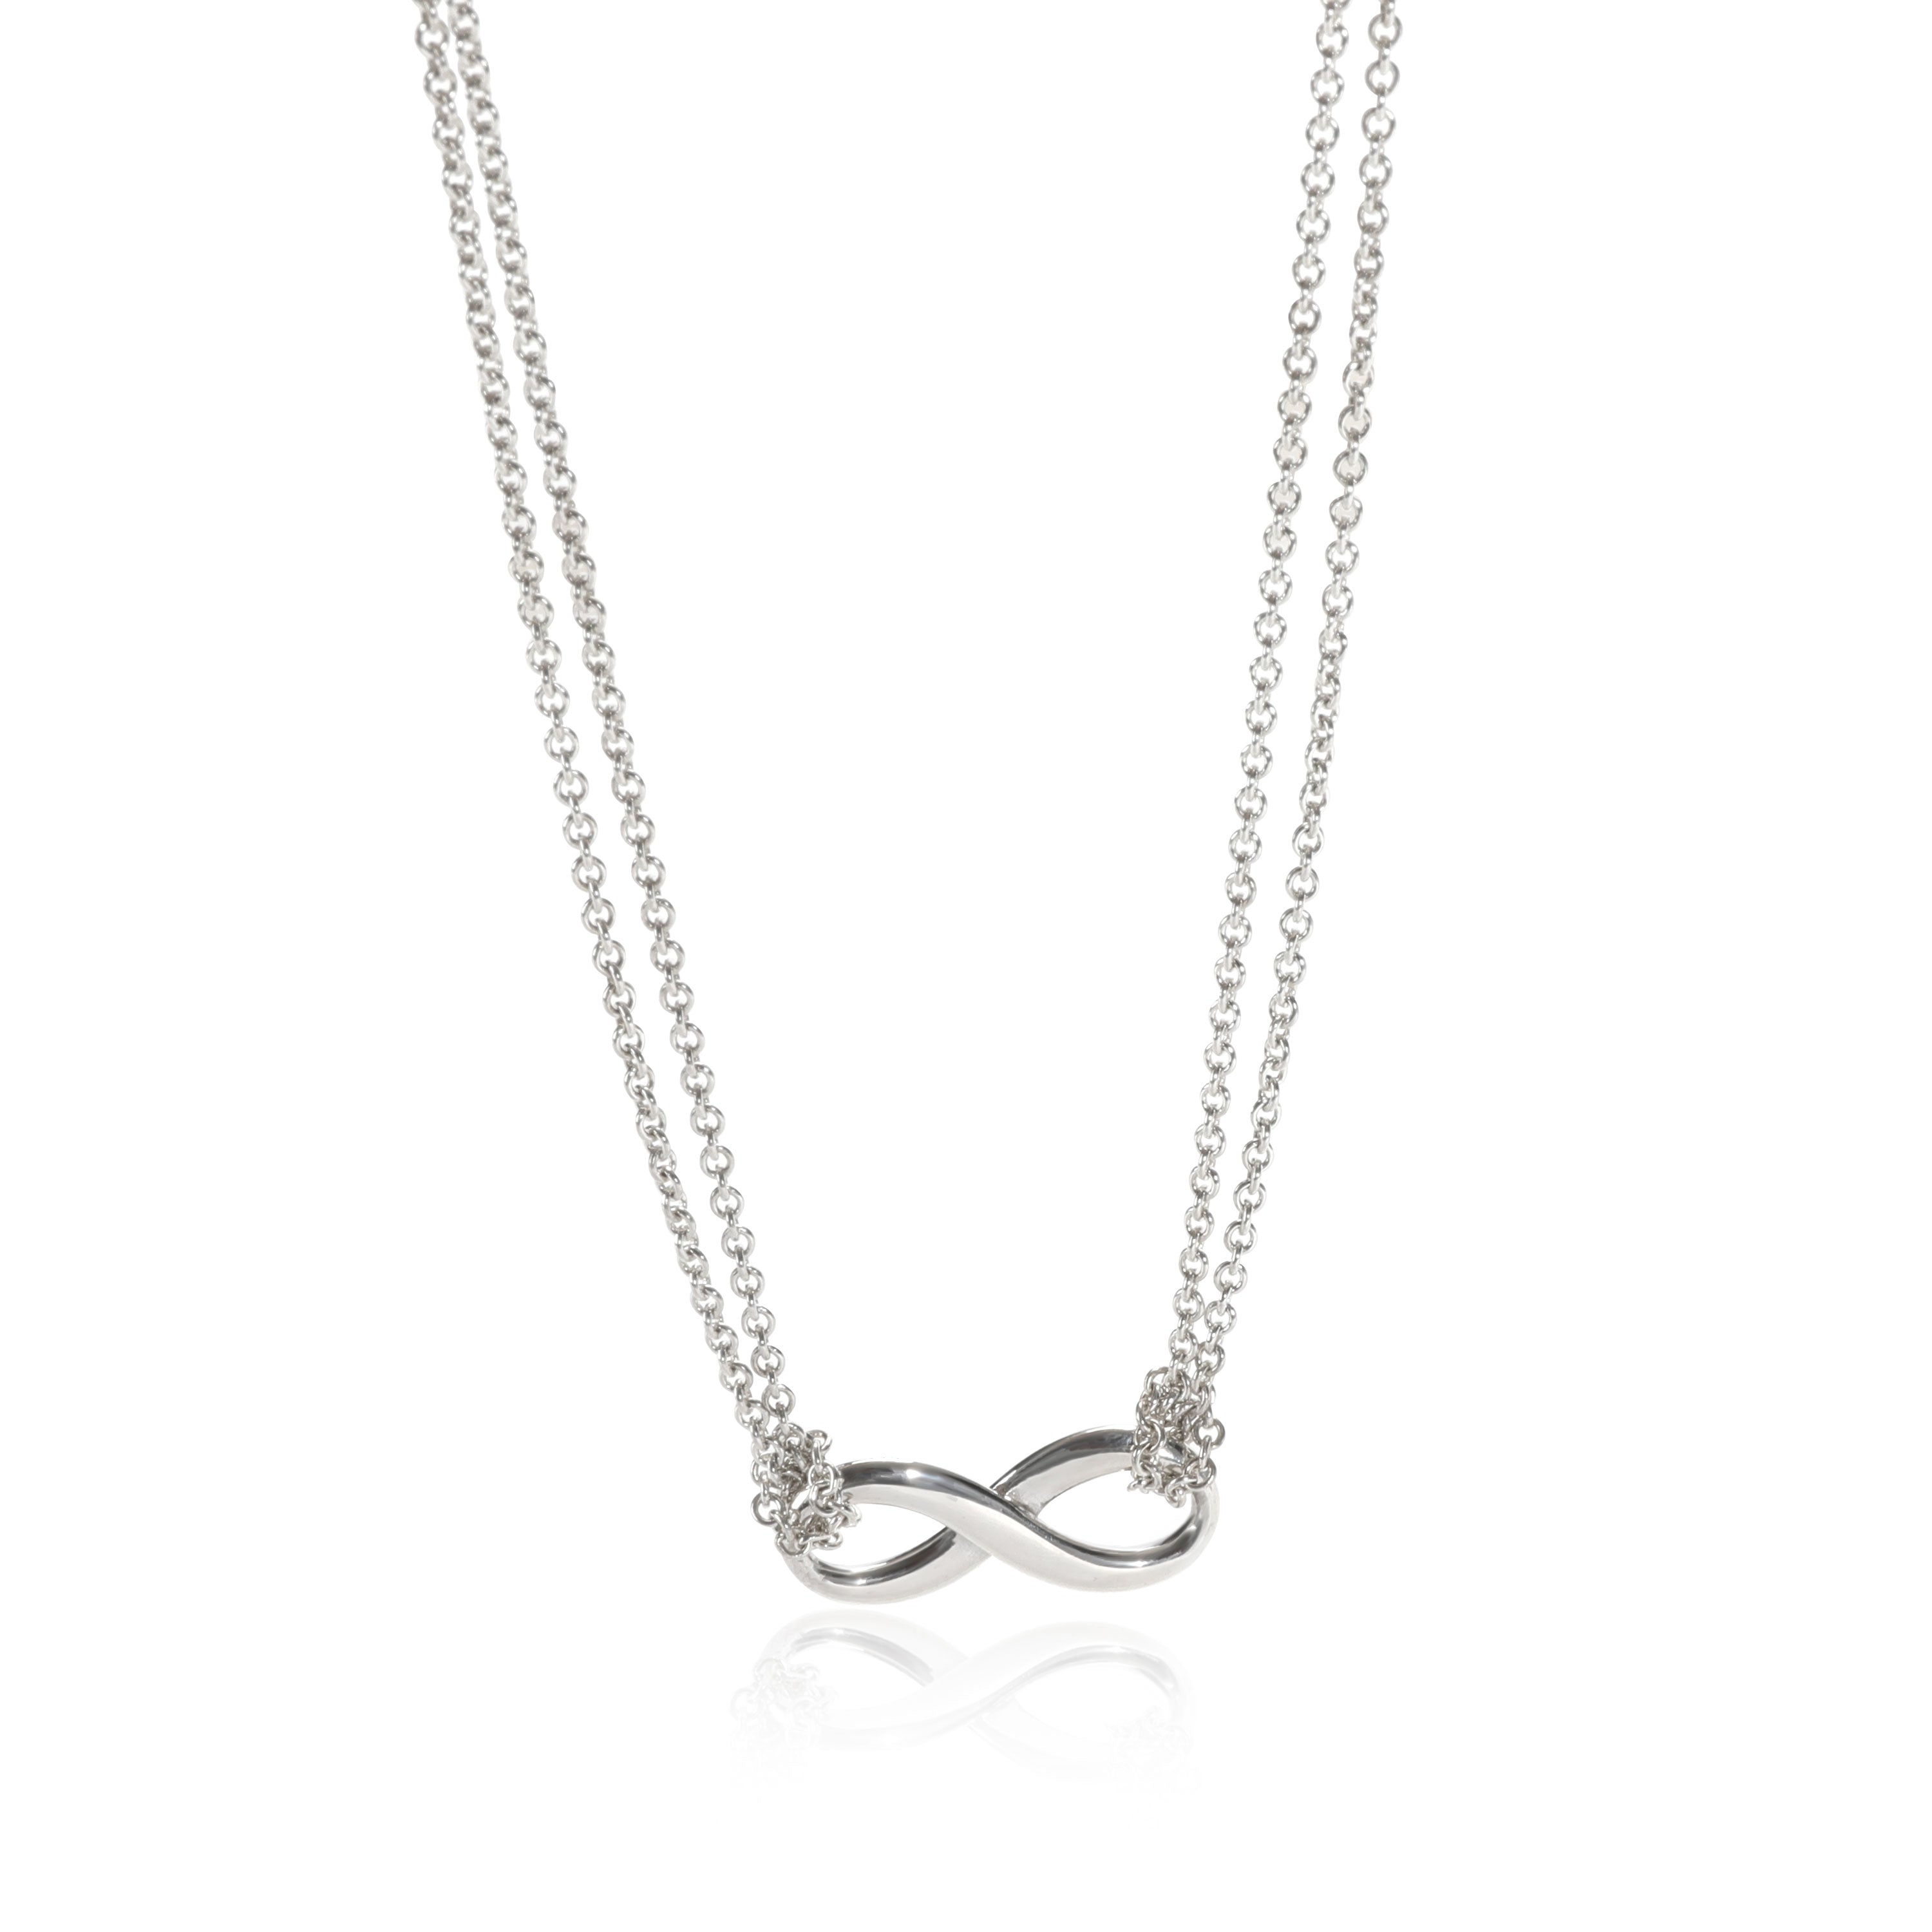 Tiffany & Co. Double Strand Sterling Silver Infinity Necklace 16.5” | eBay